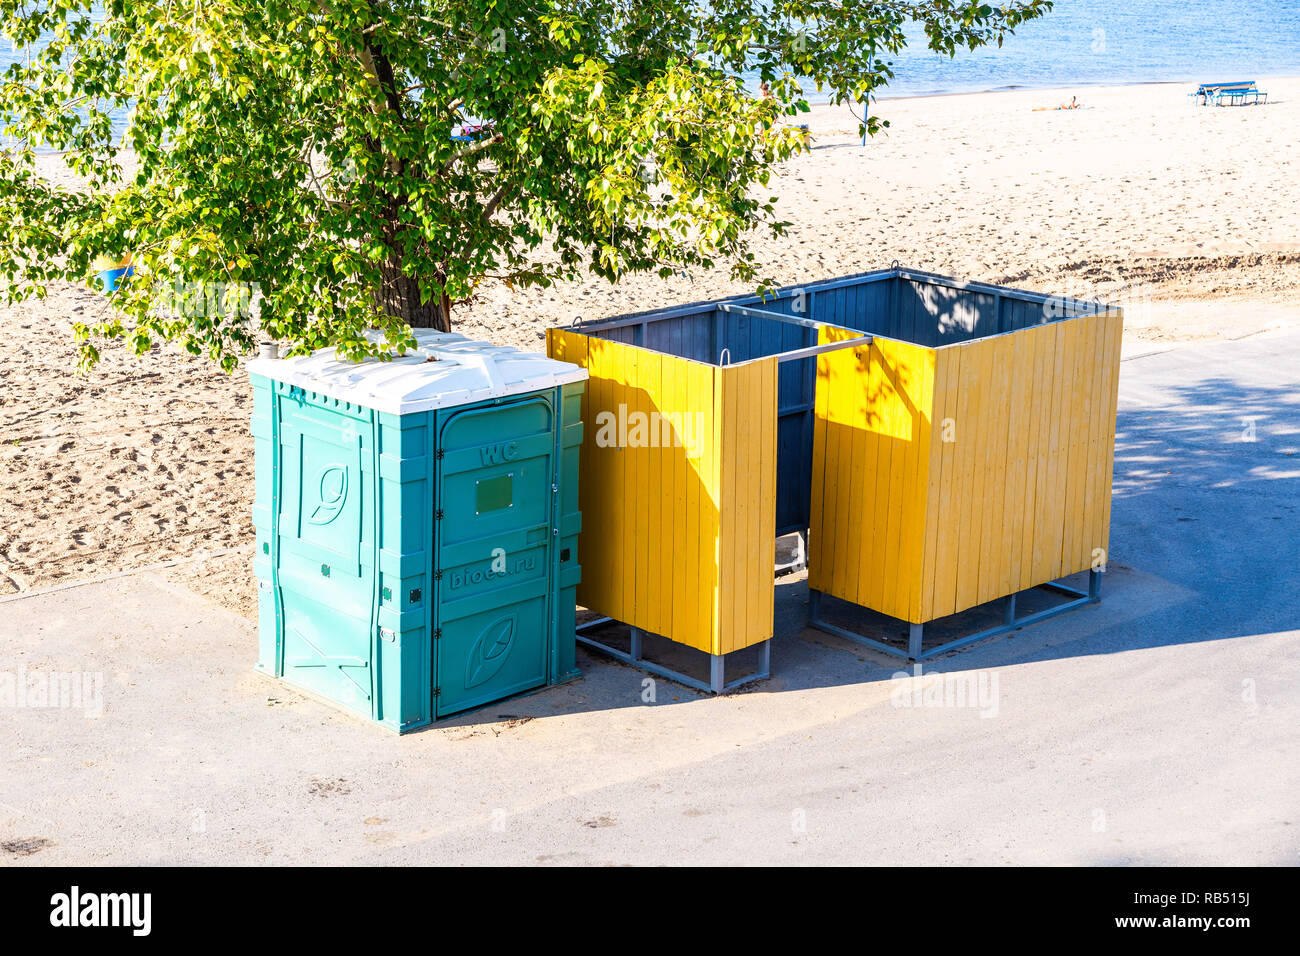 Samara, Russia - September 22, 2018: Beach changing room and mobile public toilet at the city beach on the shores of the Volga river Stock Photo